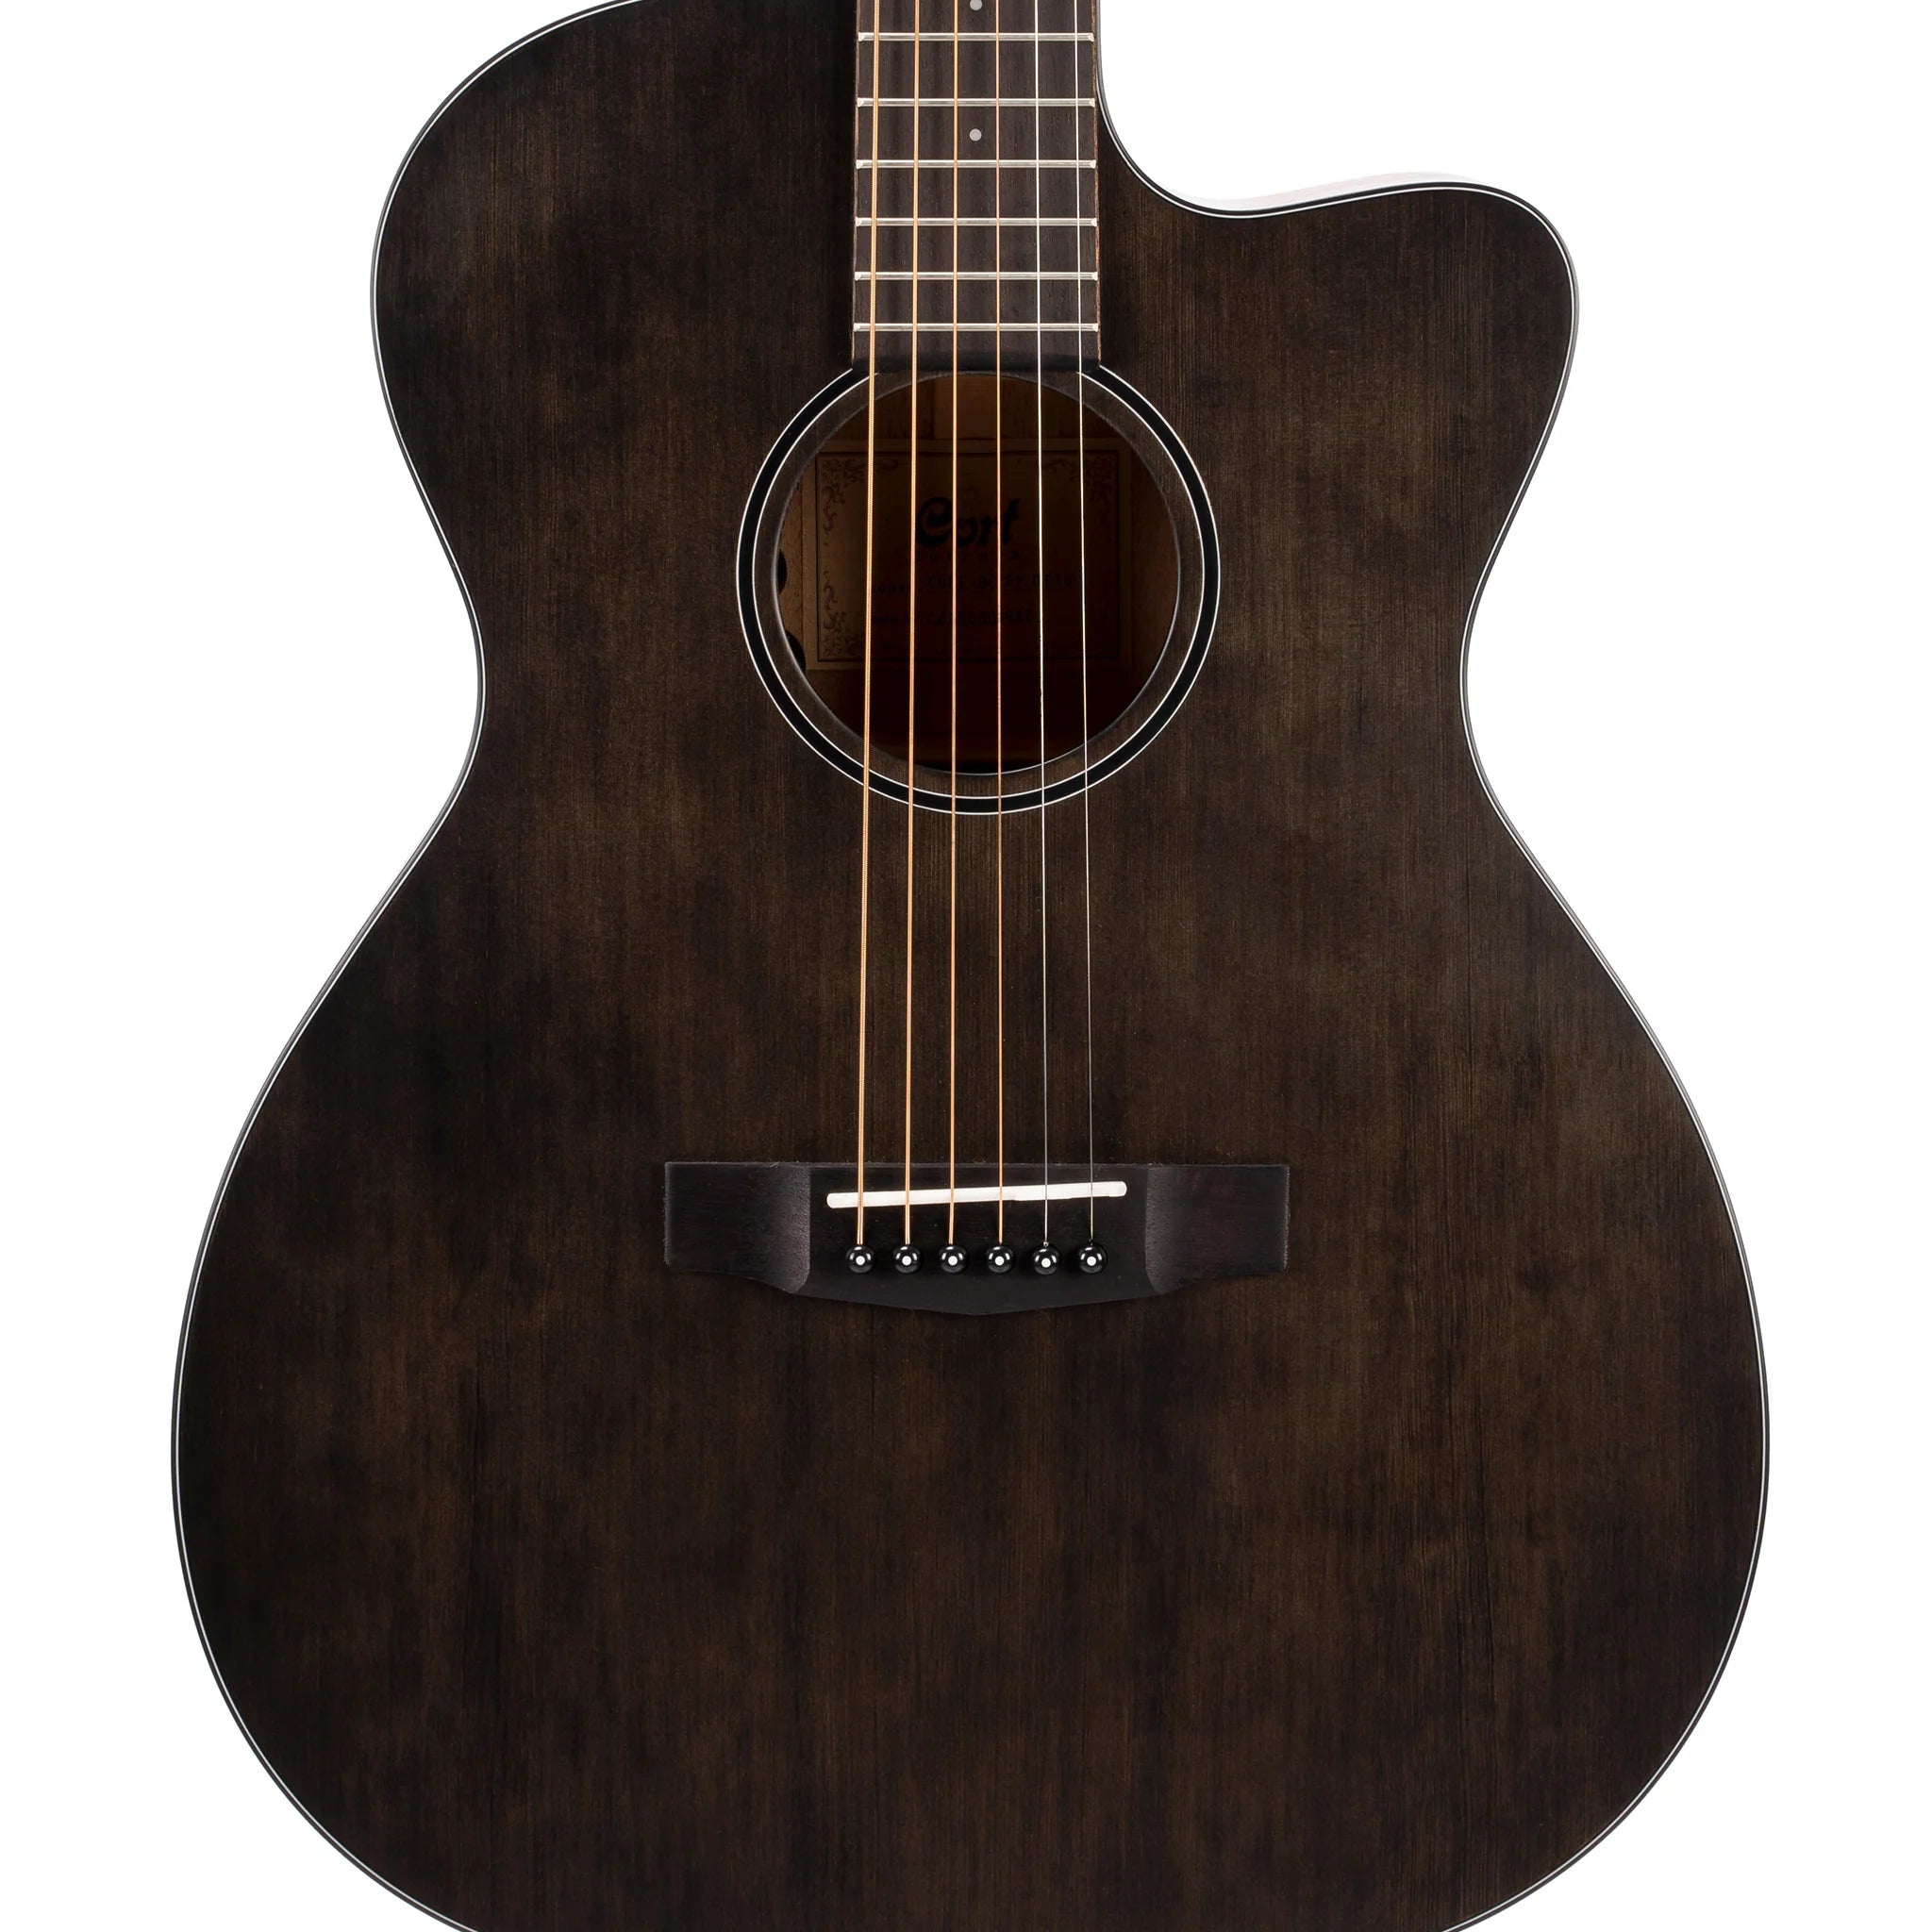 Solid Sitka Spruce Top / Solid Mahogany Back & Sides